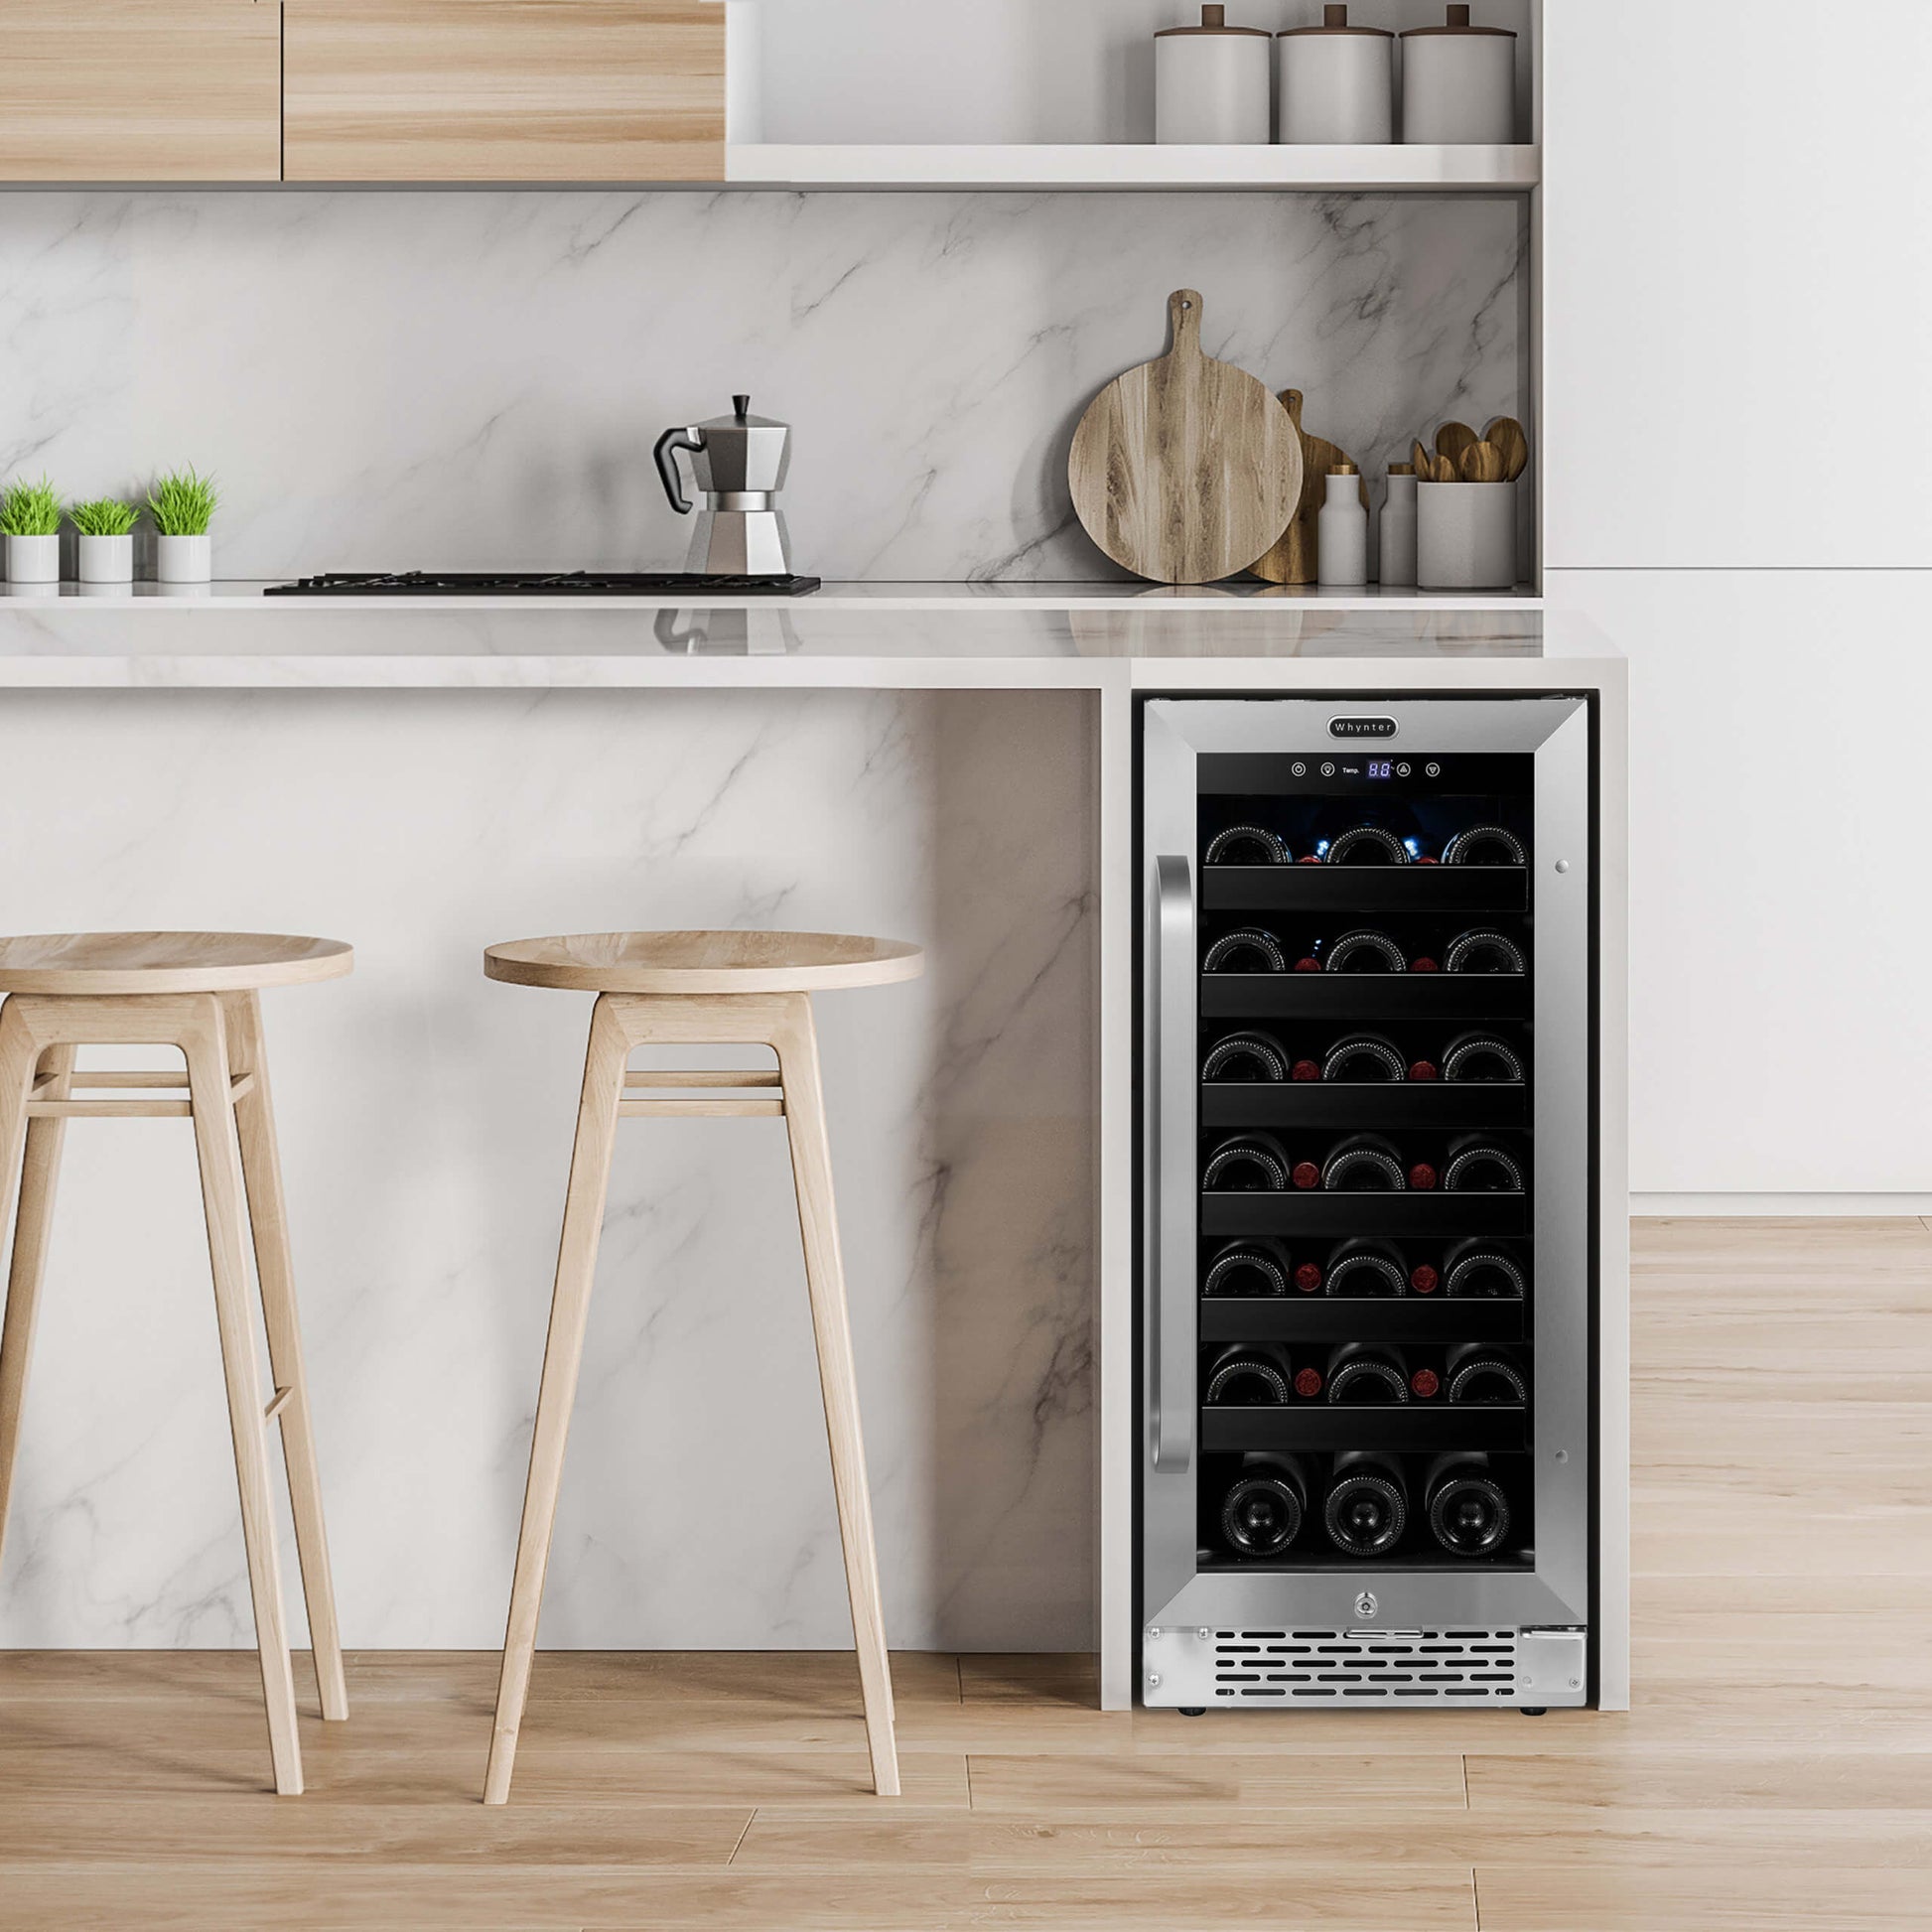 Whynter BWR-308SB 15 inch Built-In 33 Bottle Undercounter Stainless Steel Wine Refrigerator with Reversible Door, Digital Control, Lock, and Carbon Filter